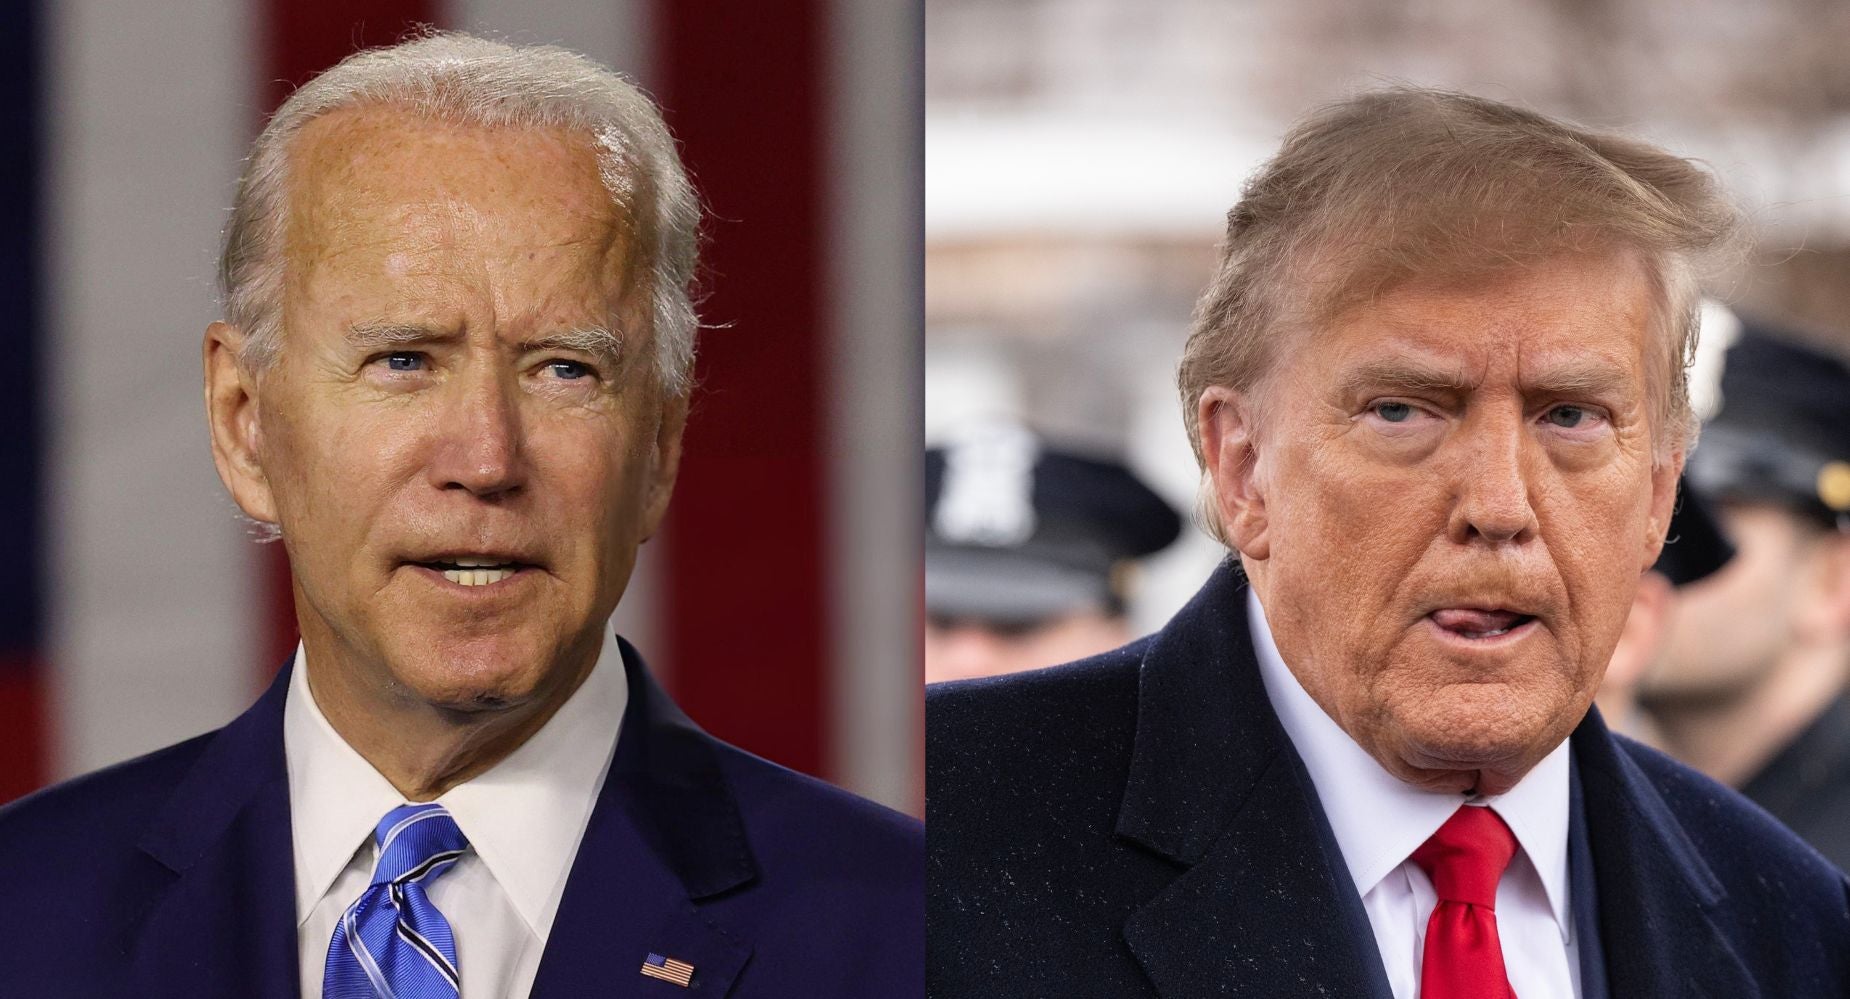 Trump Vs Biden: Poll Reveals Surprise Preference For One Candidate Over Other When It Comes To Economy